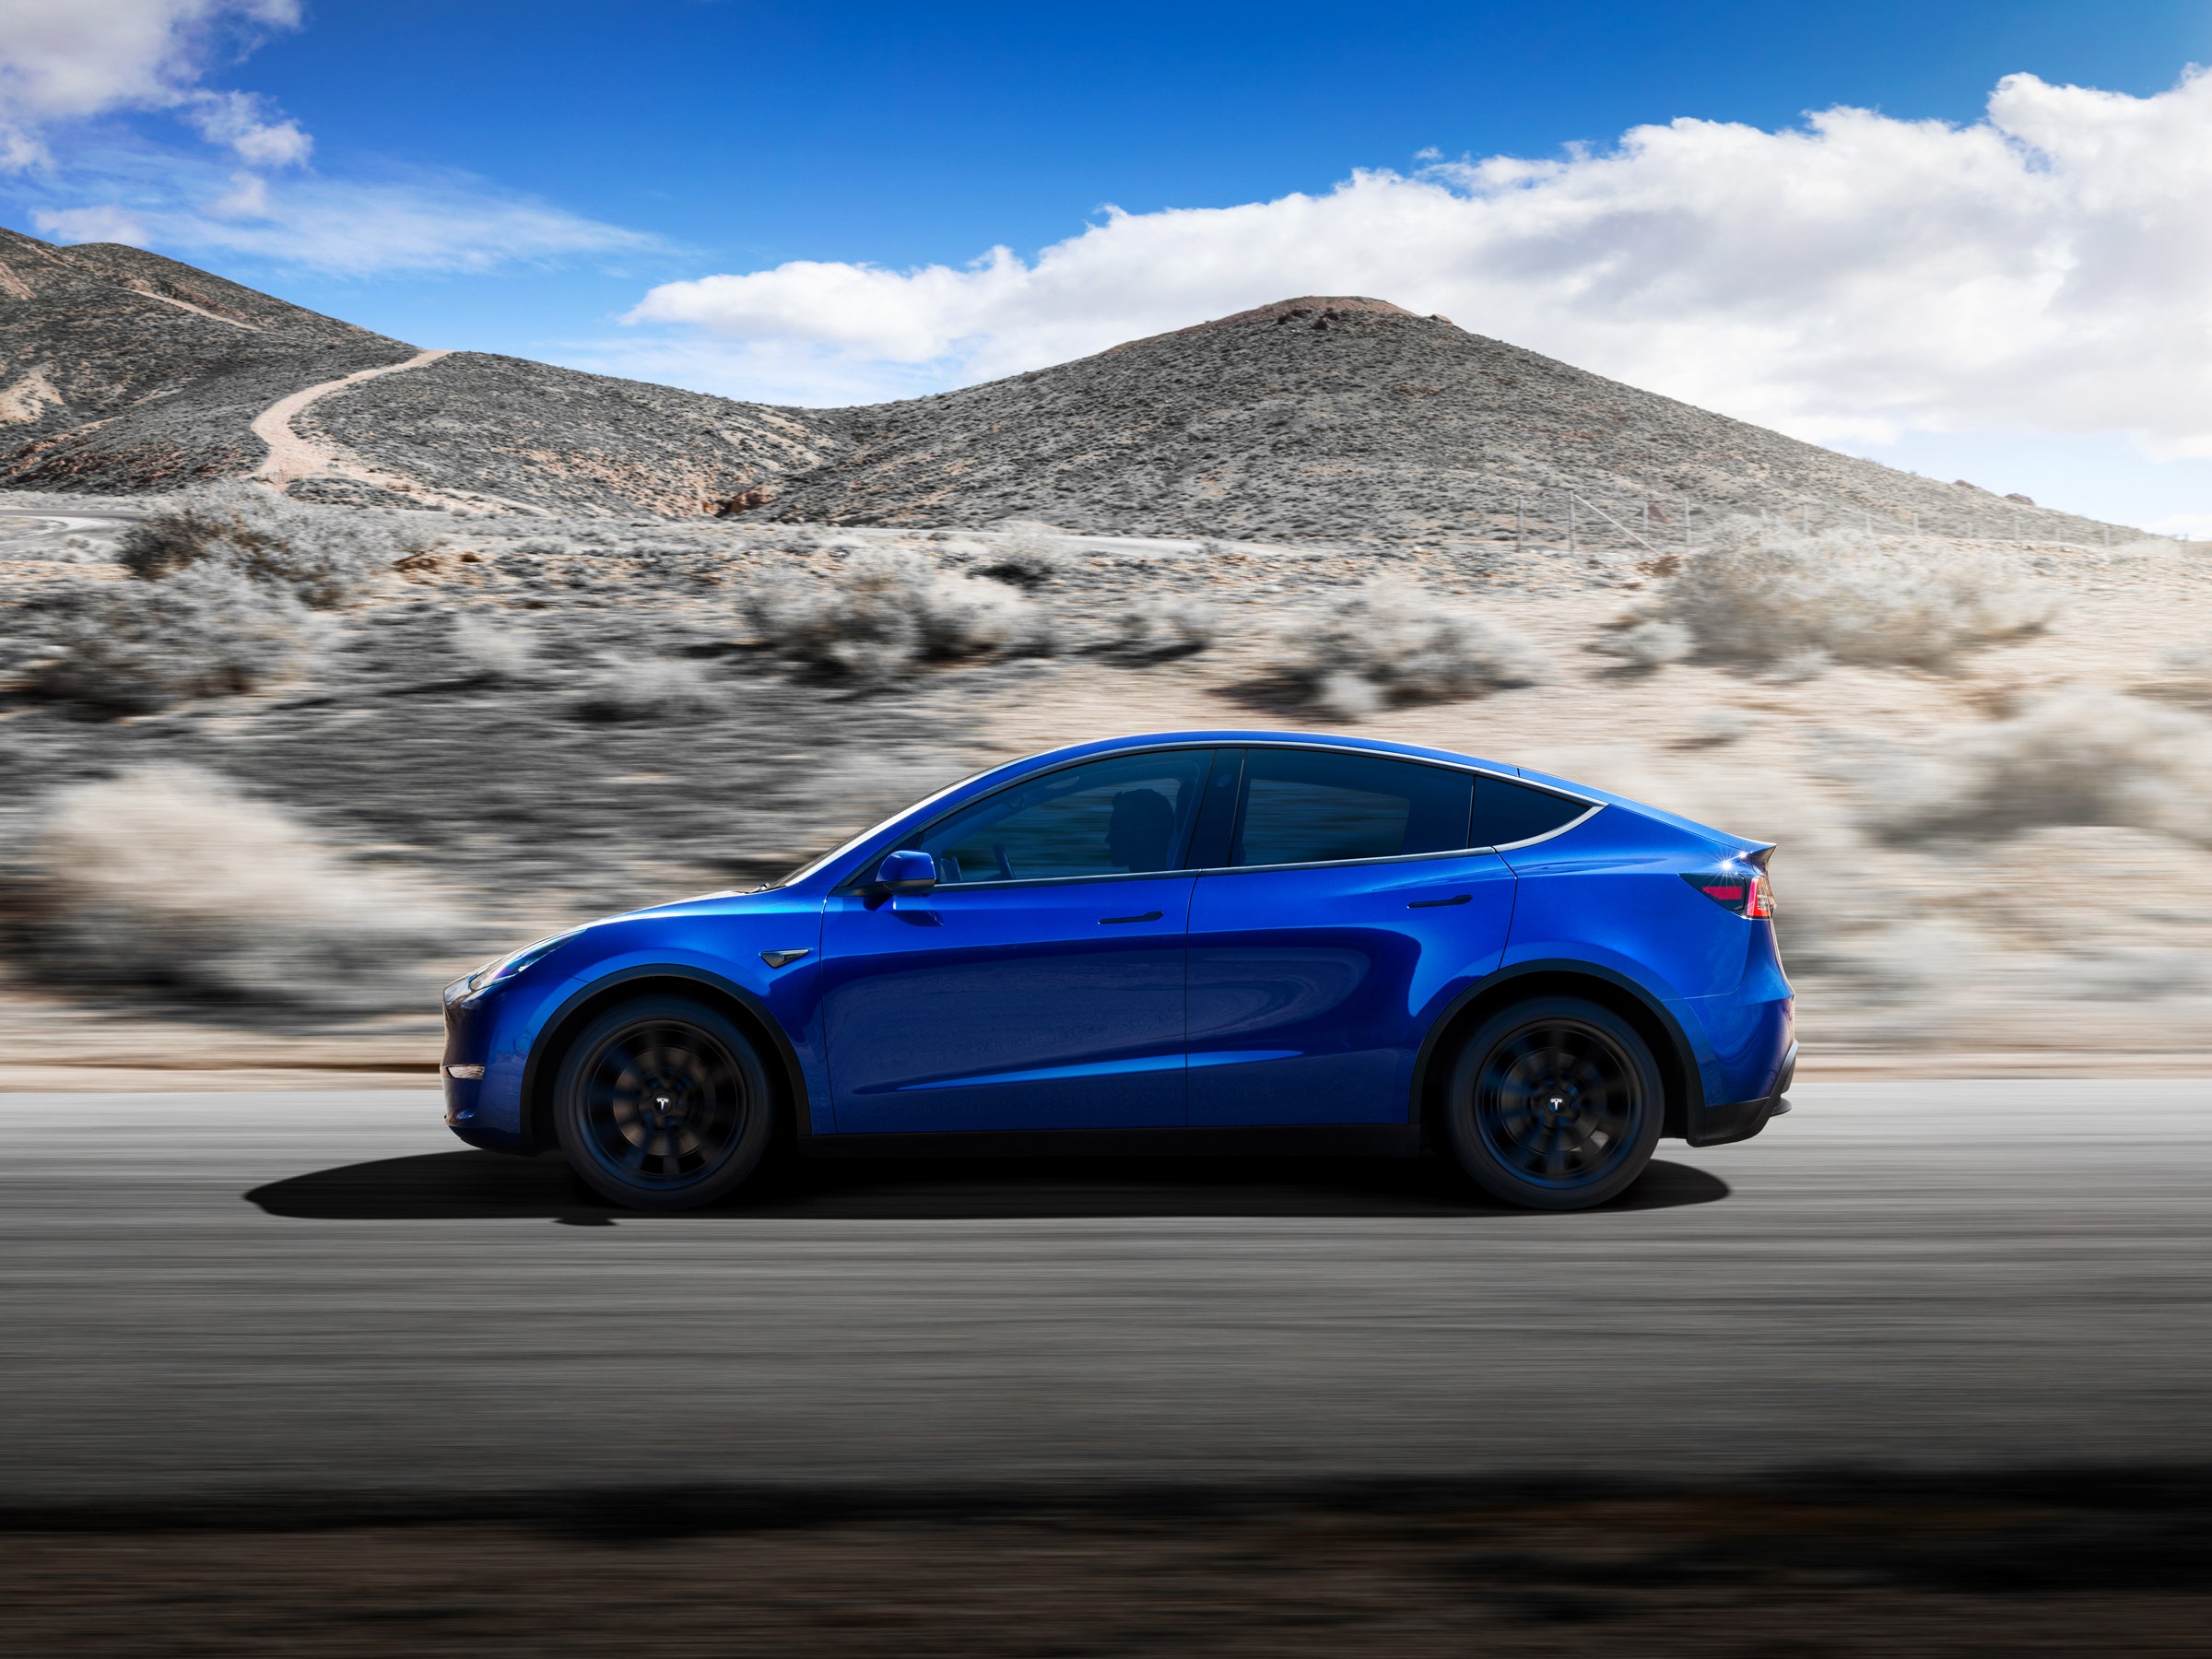 Tesla's Model Y SUV Brings More to the Masses | WIRED